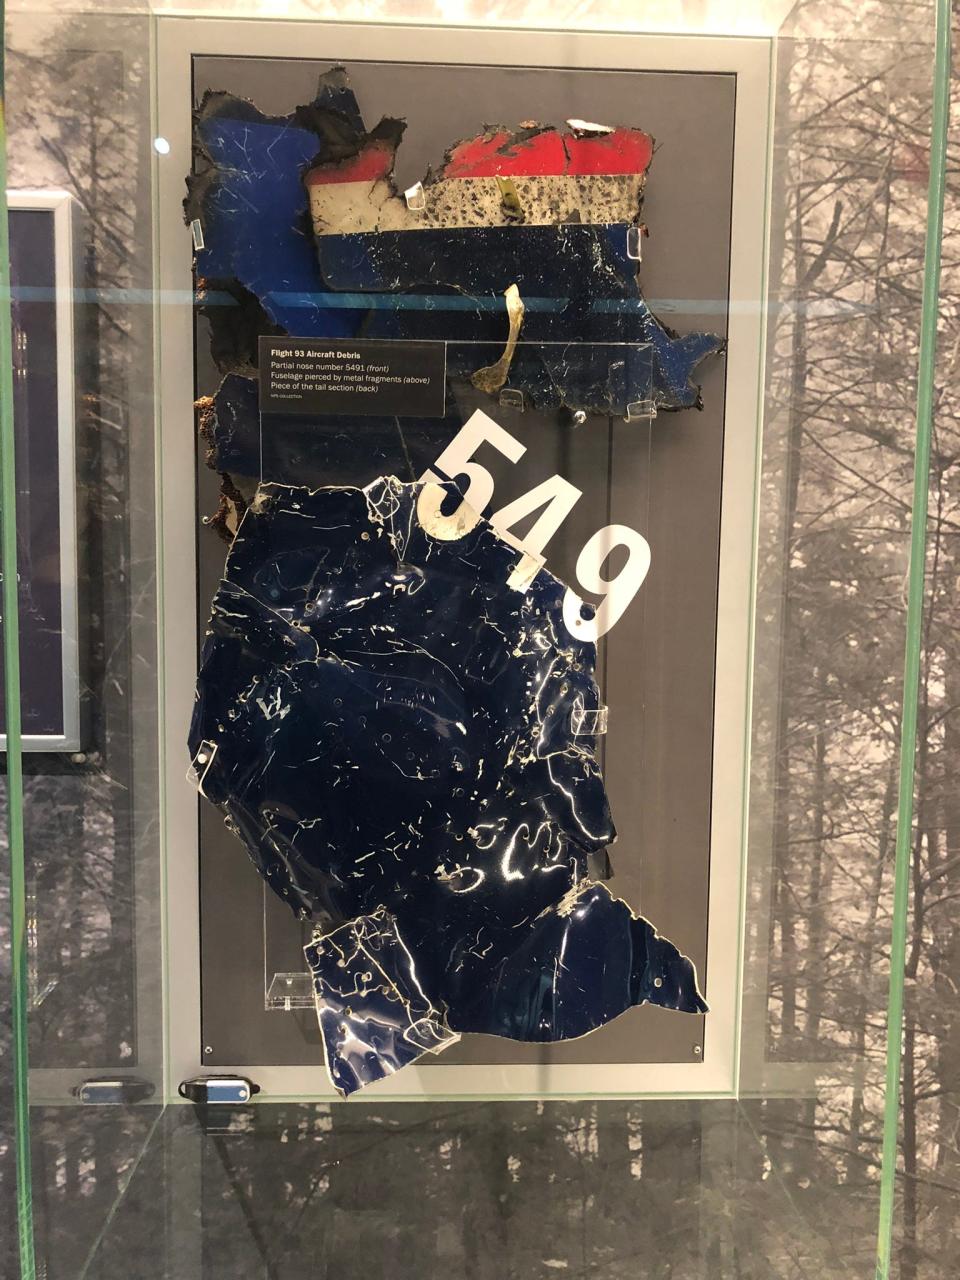 A scarred and crumpled section of Flight 93's fuselage shows the first three digits of the plane's ID number 5491 in a display at the Flight 93 National Memorial Visitor Center.